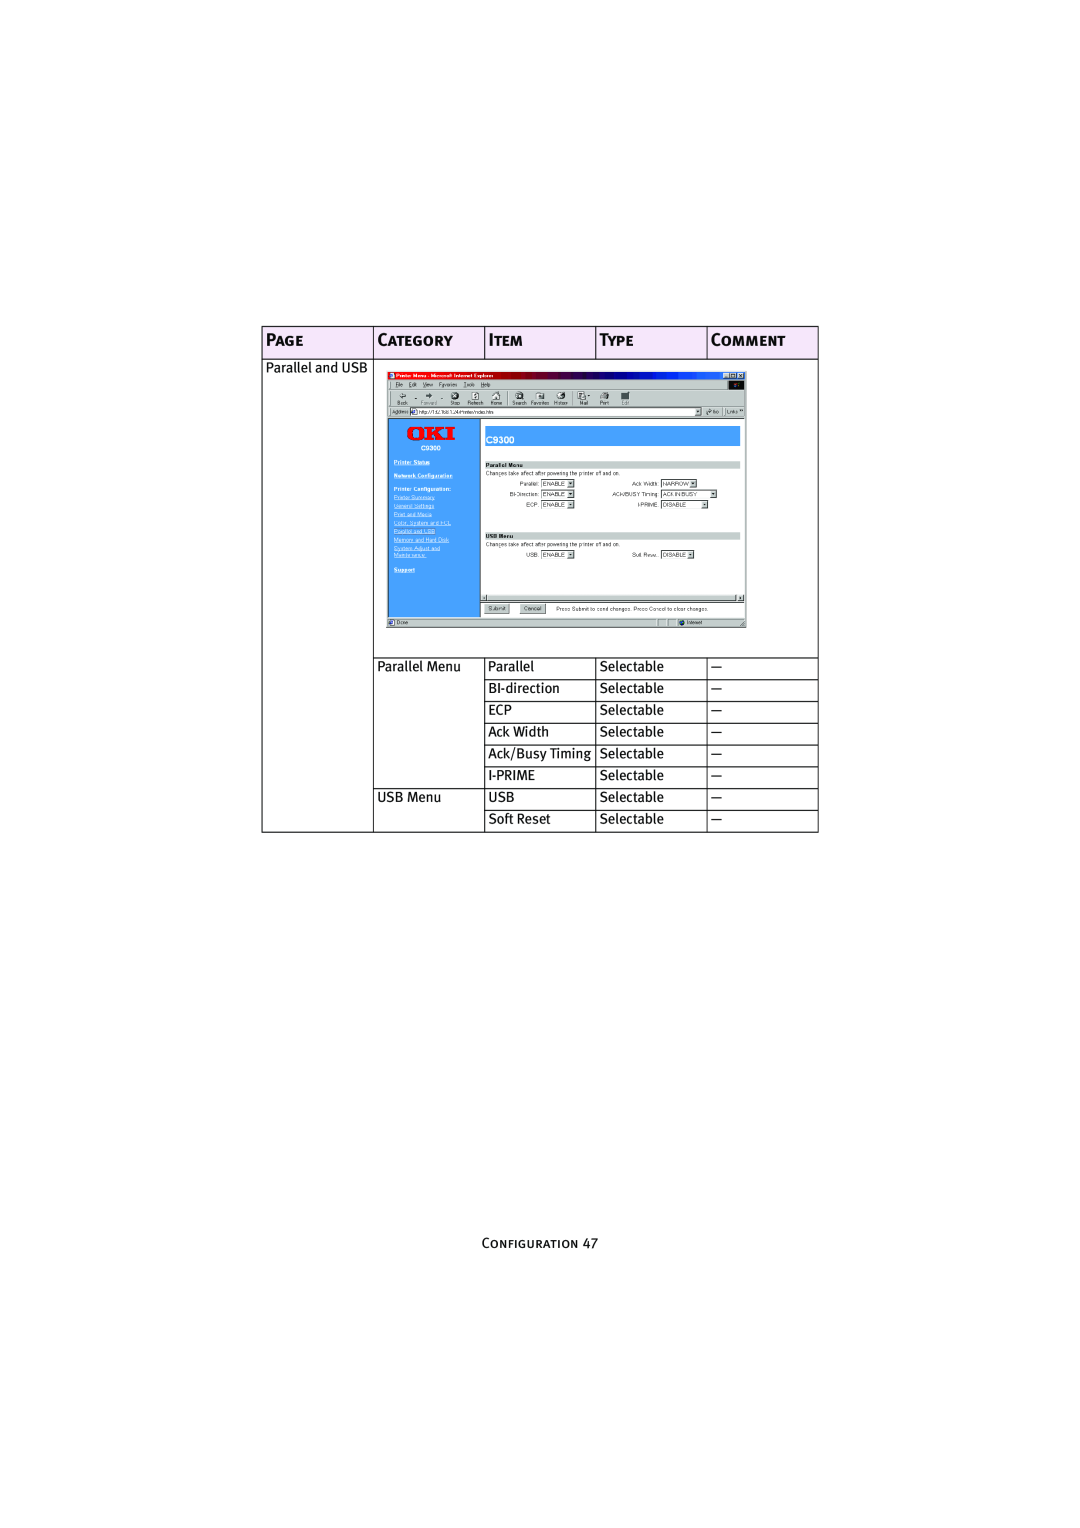 Oki 7300e manual Page, Category, Type, Comment 